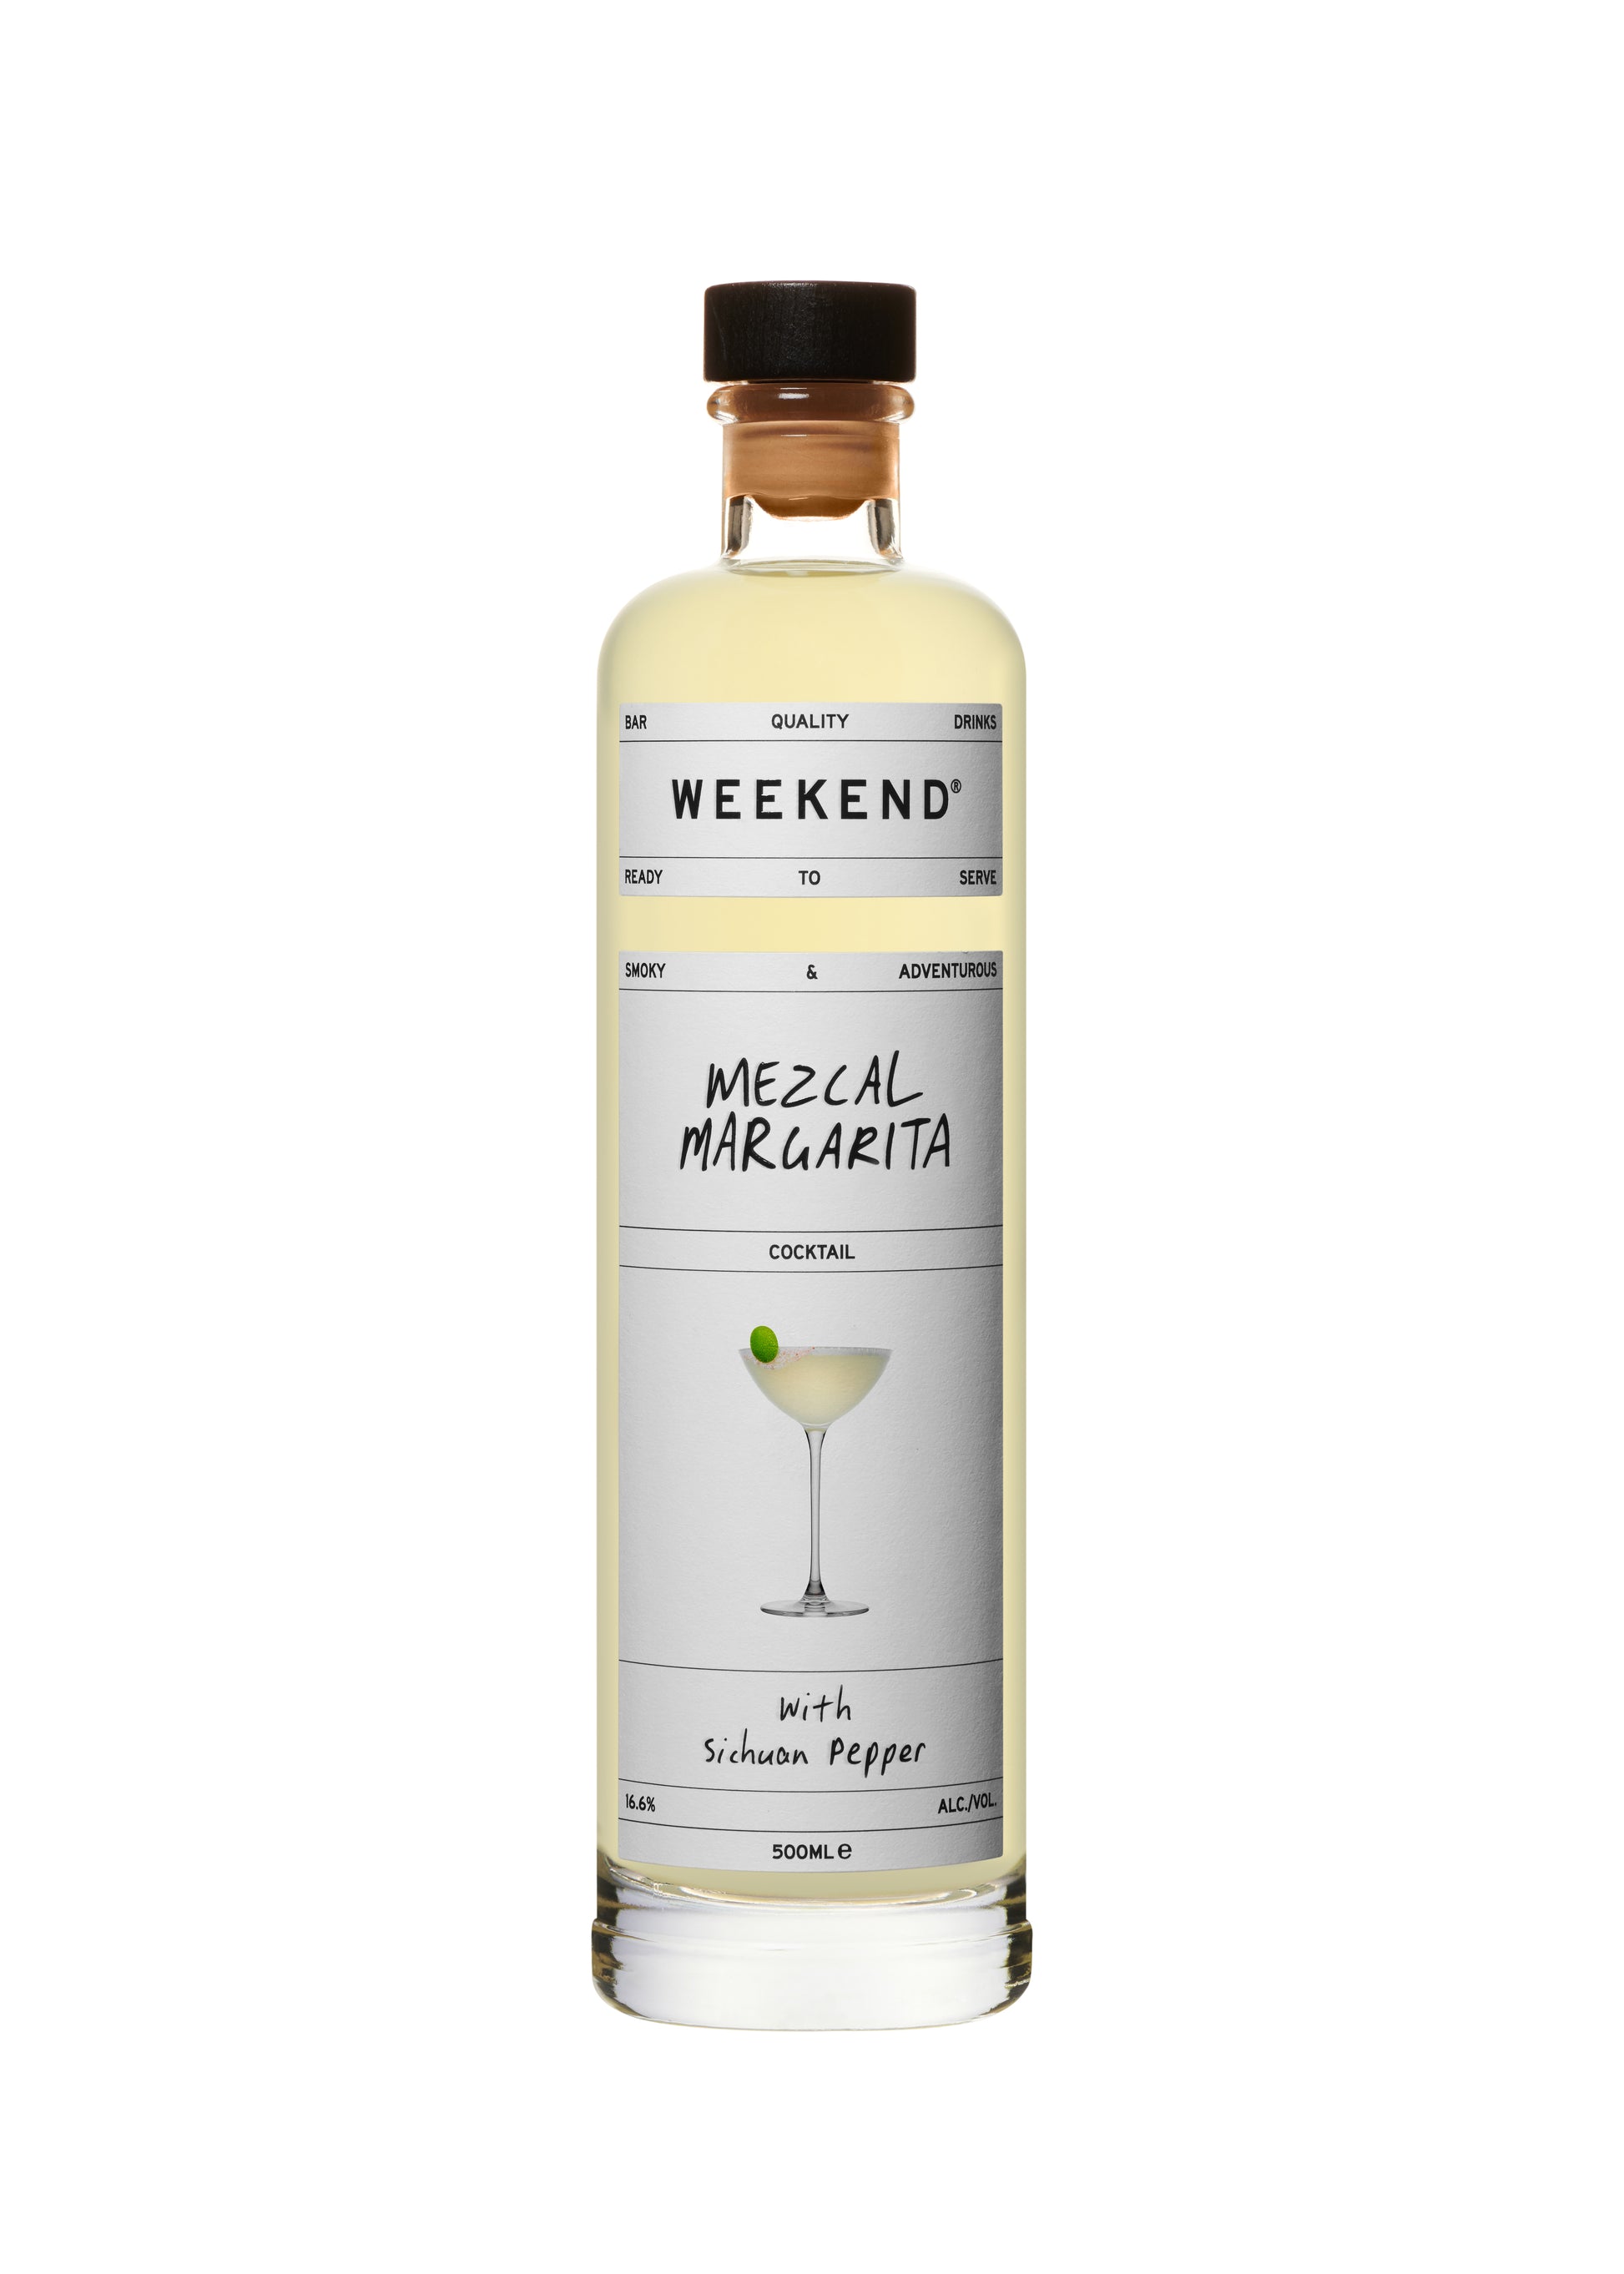 Pre-mixed mezcal margarita cocktail in a bottle